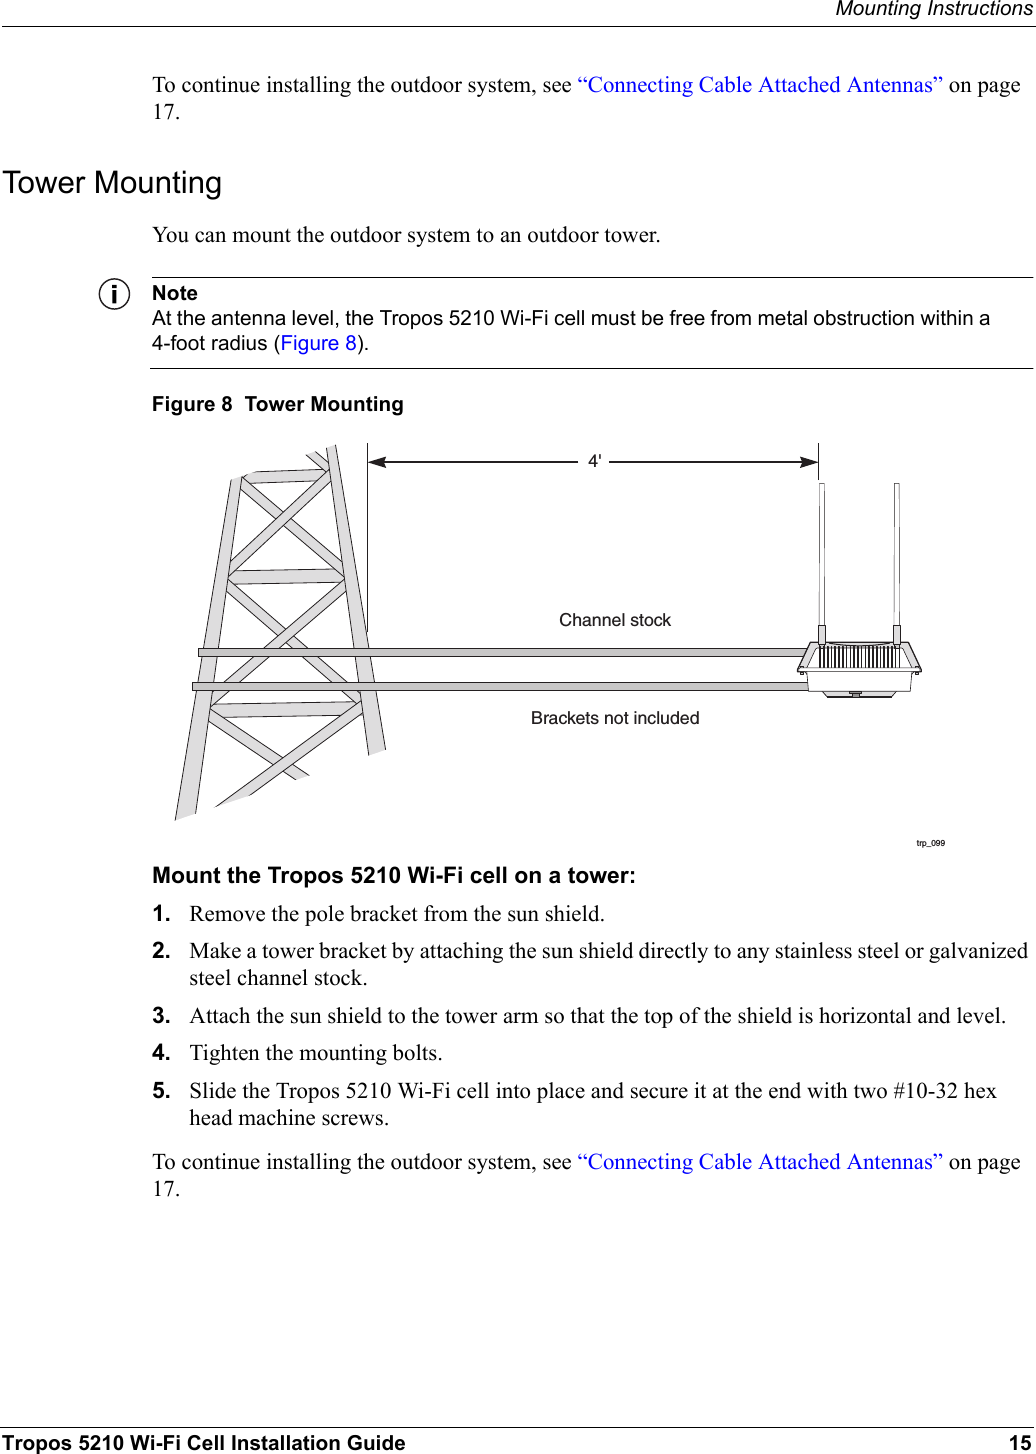 Mounting InstructionsTropos 5210 Wi-Fi Cell Installation Guide 15To continue installing the outdoor system, see “Connecting Cable Attached Antennas” on page 17.Tower MountingYou can mount the outdoor system to an outdoor tower. NoteAt the antenna level, the Tropos 5210 Wi-Fi cell must be free from metal obstruction within a 4-foot radius (Figure 8).Figure 8  Tower MountingMount the Tropos 5210 Wi-Fi cell on a tower:1. Remove the pole bracket from the sun shield.2. Make a tower bracket by attaching the sun shield directly to any stainless steel or galvanized steel channel stock. 3. Attach the sun shield to the tower arm so that the top of the shield is horizontal and level.4. Tighten the mounting bolts.5. Slide the Tropos 5210 Wi-Fi cell into place and secure it at the end with two #10-32 hex head machine screws.To continue installing the outdoor system, see “Connecting Cable Attached Antennas” on page 17.trp_0994&apos;Brackets not includedChannel stock